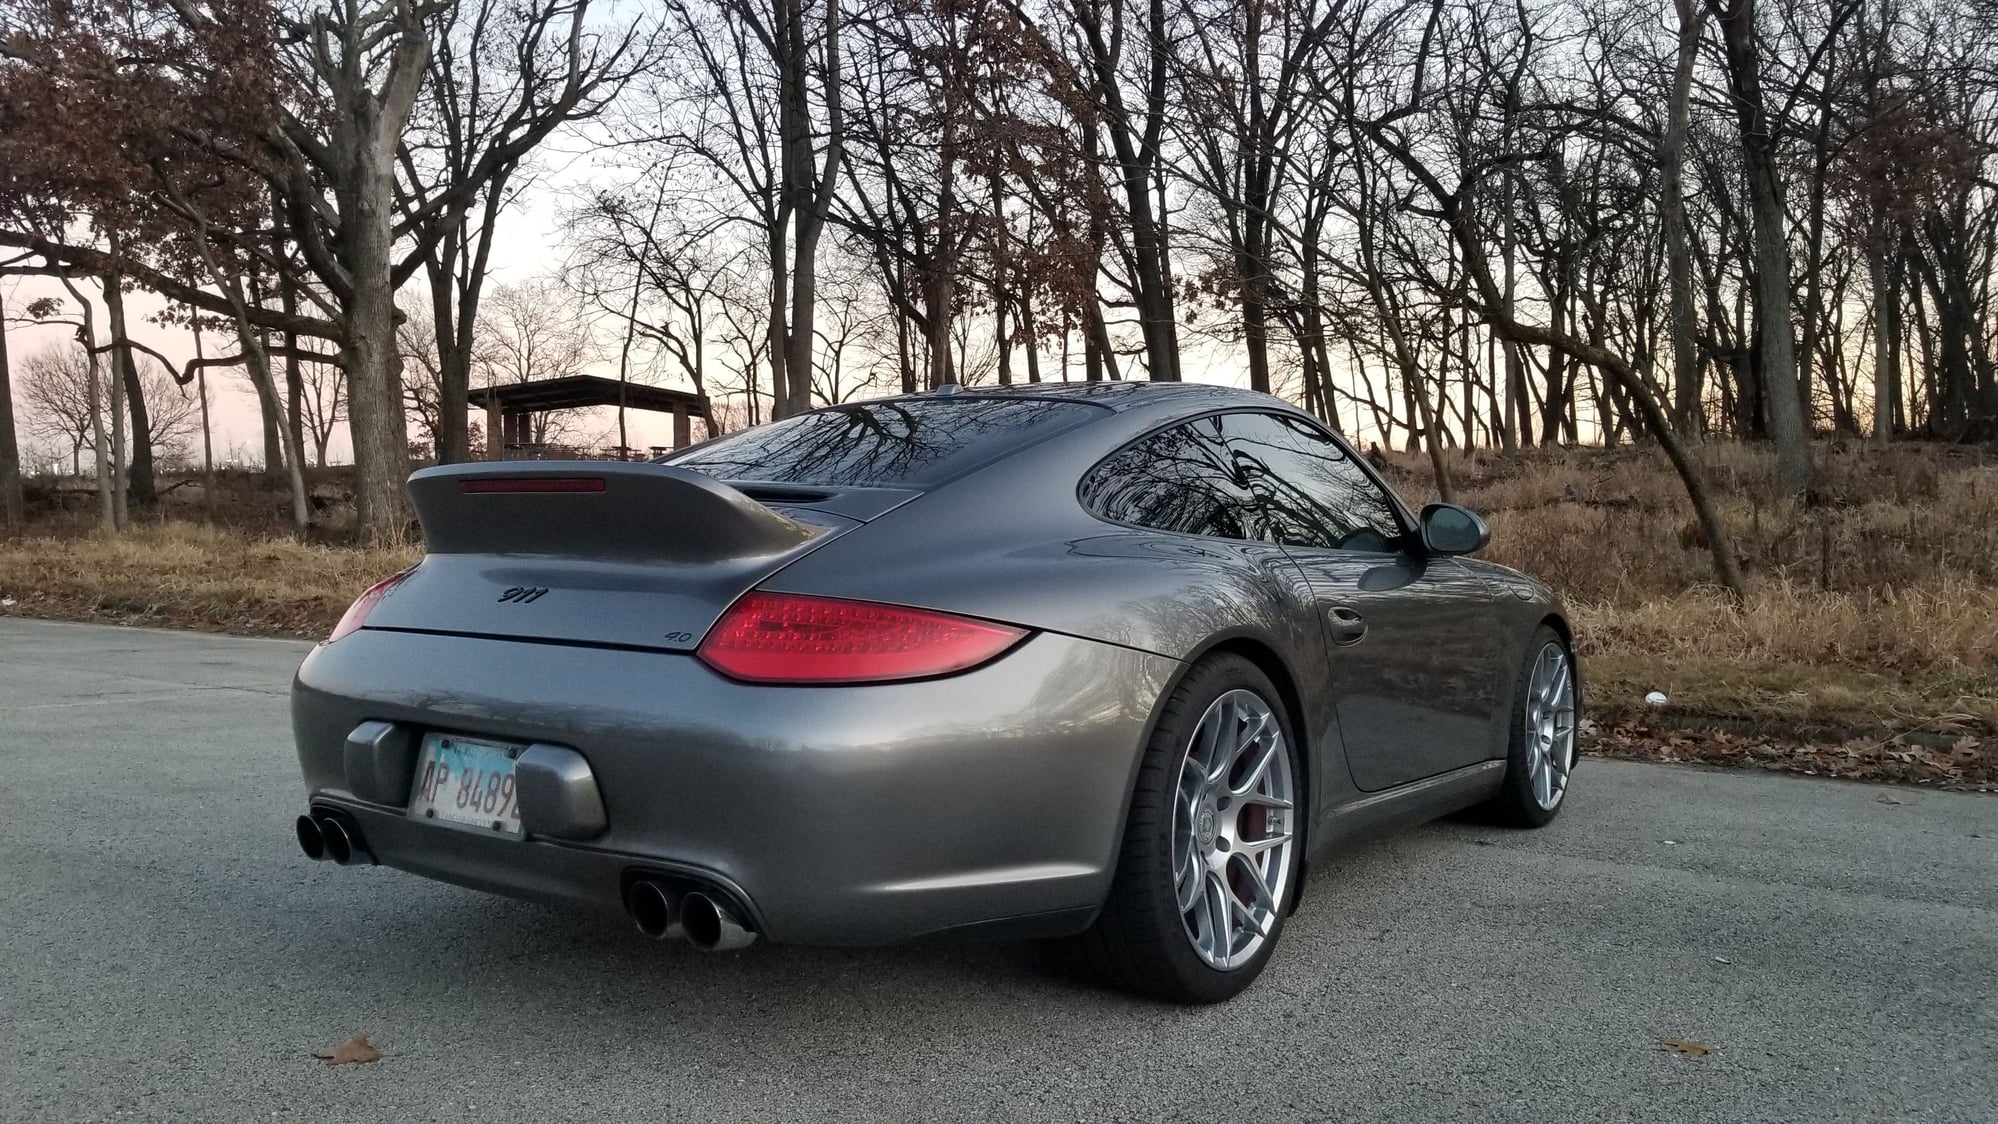 2009 Porsche 911 - feeler: 4.0 Liter 2009 911 C4S 997.2 PDK, engine by Jake Raby / Flat Six Innovations - Used - VIN see build sheet - 80,600 Miles - 6 cyl - AWD - Automatic - Coupe - Gray - Lyons, IL 60534, United States